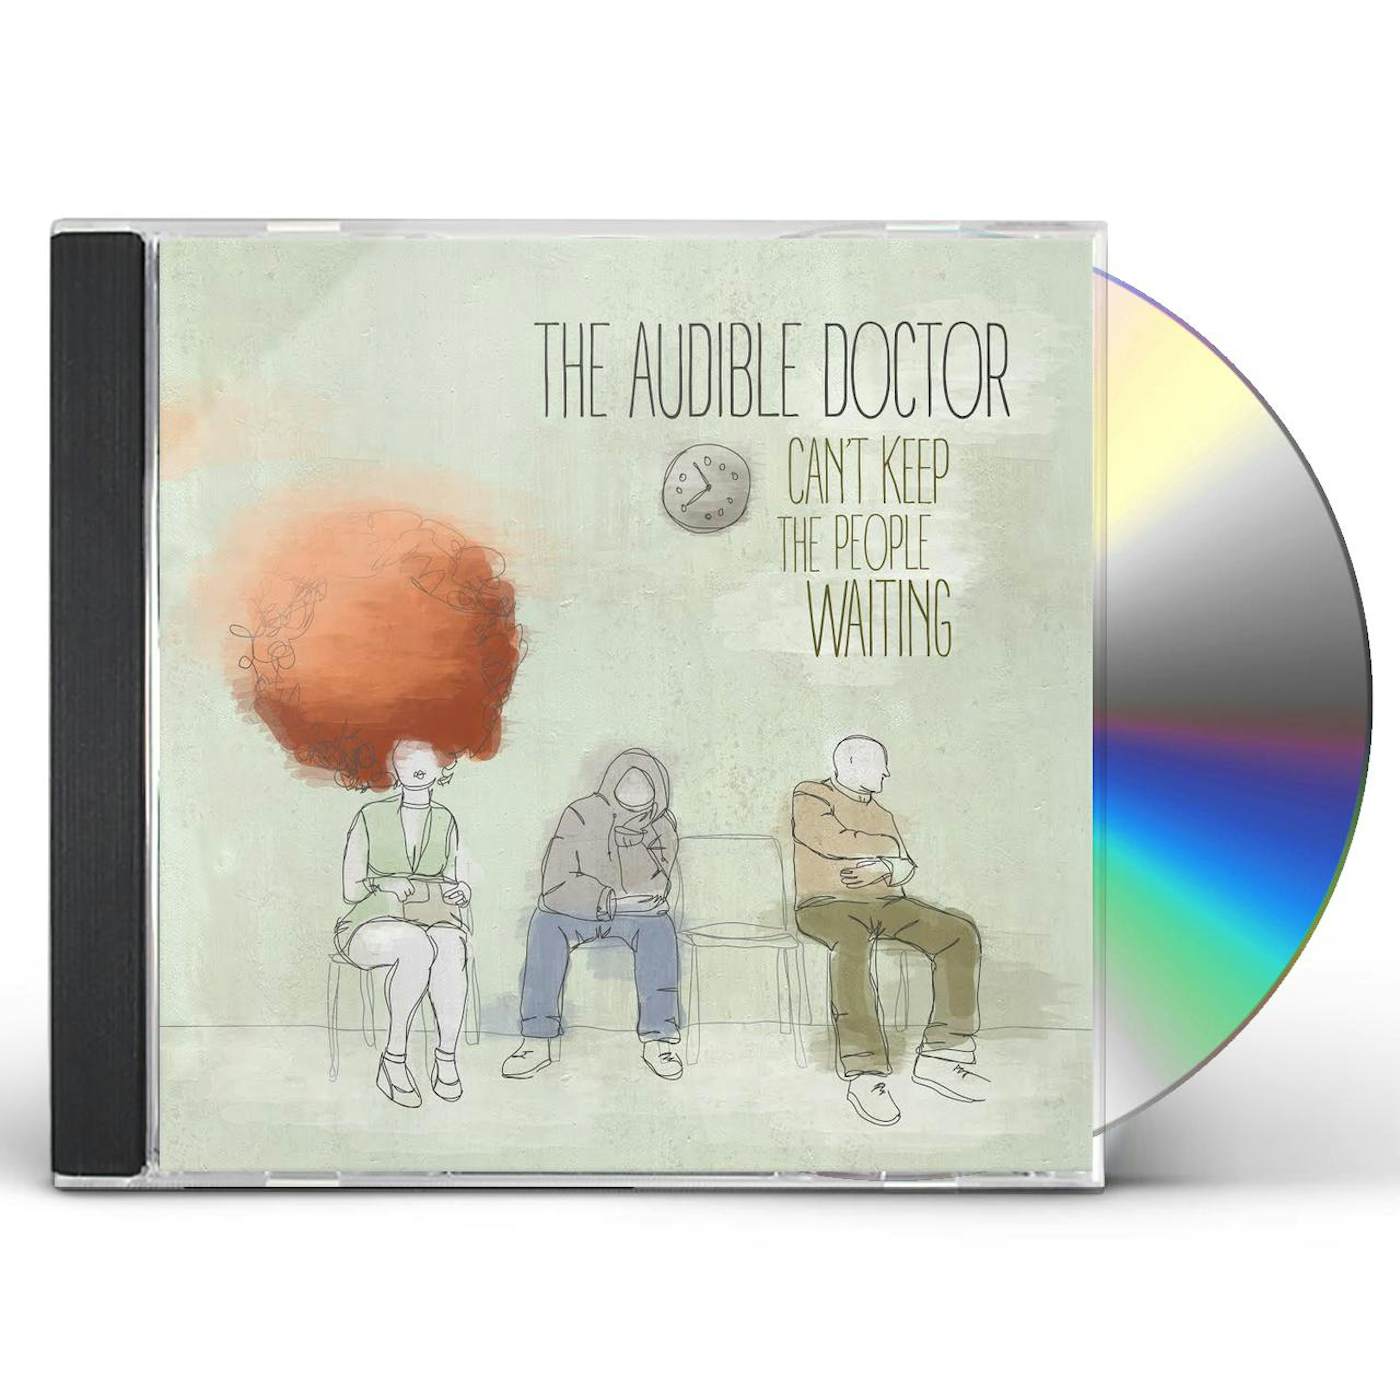 The Audible Doctor CAN'T KEEP THE PEOPLE WAITING CD